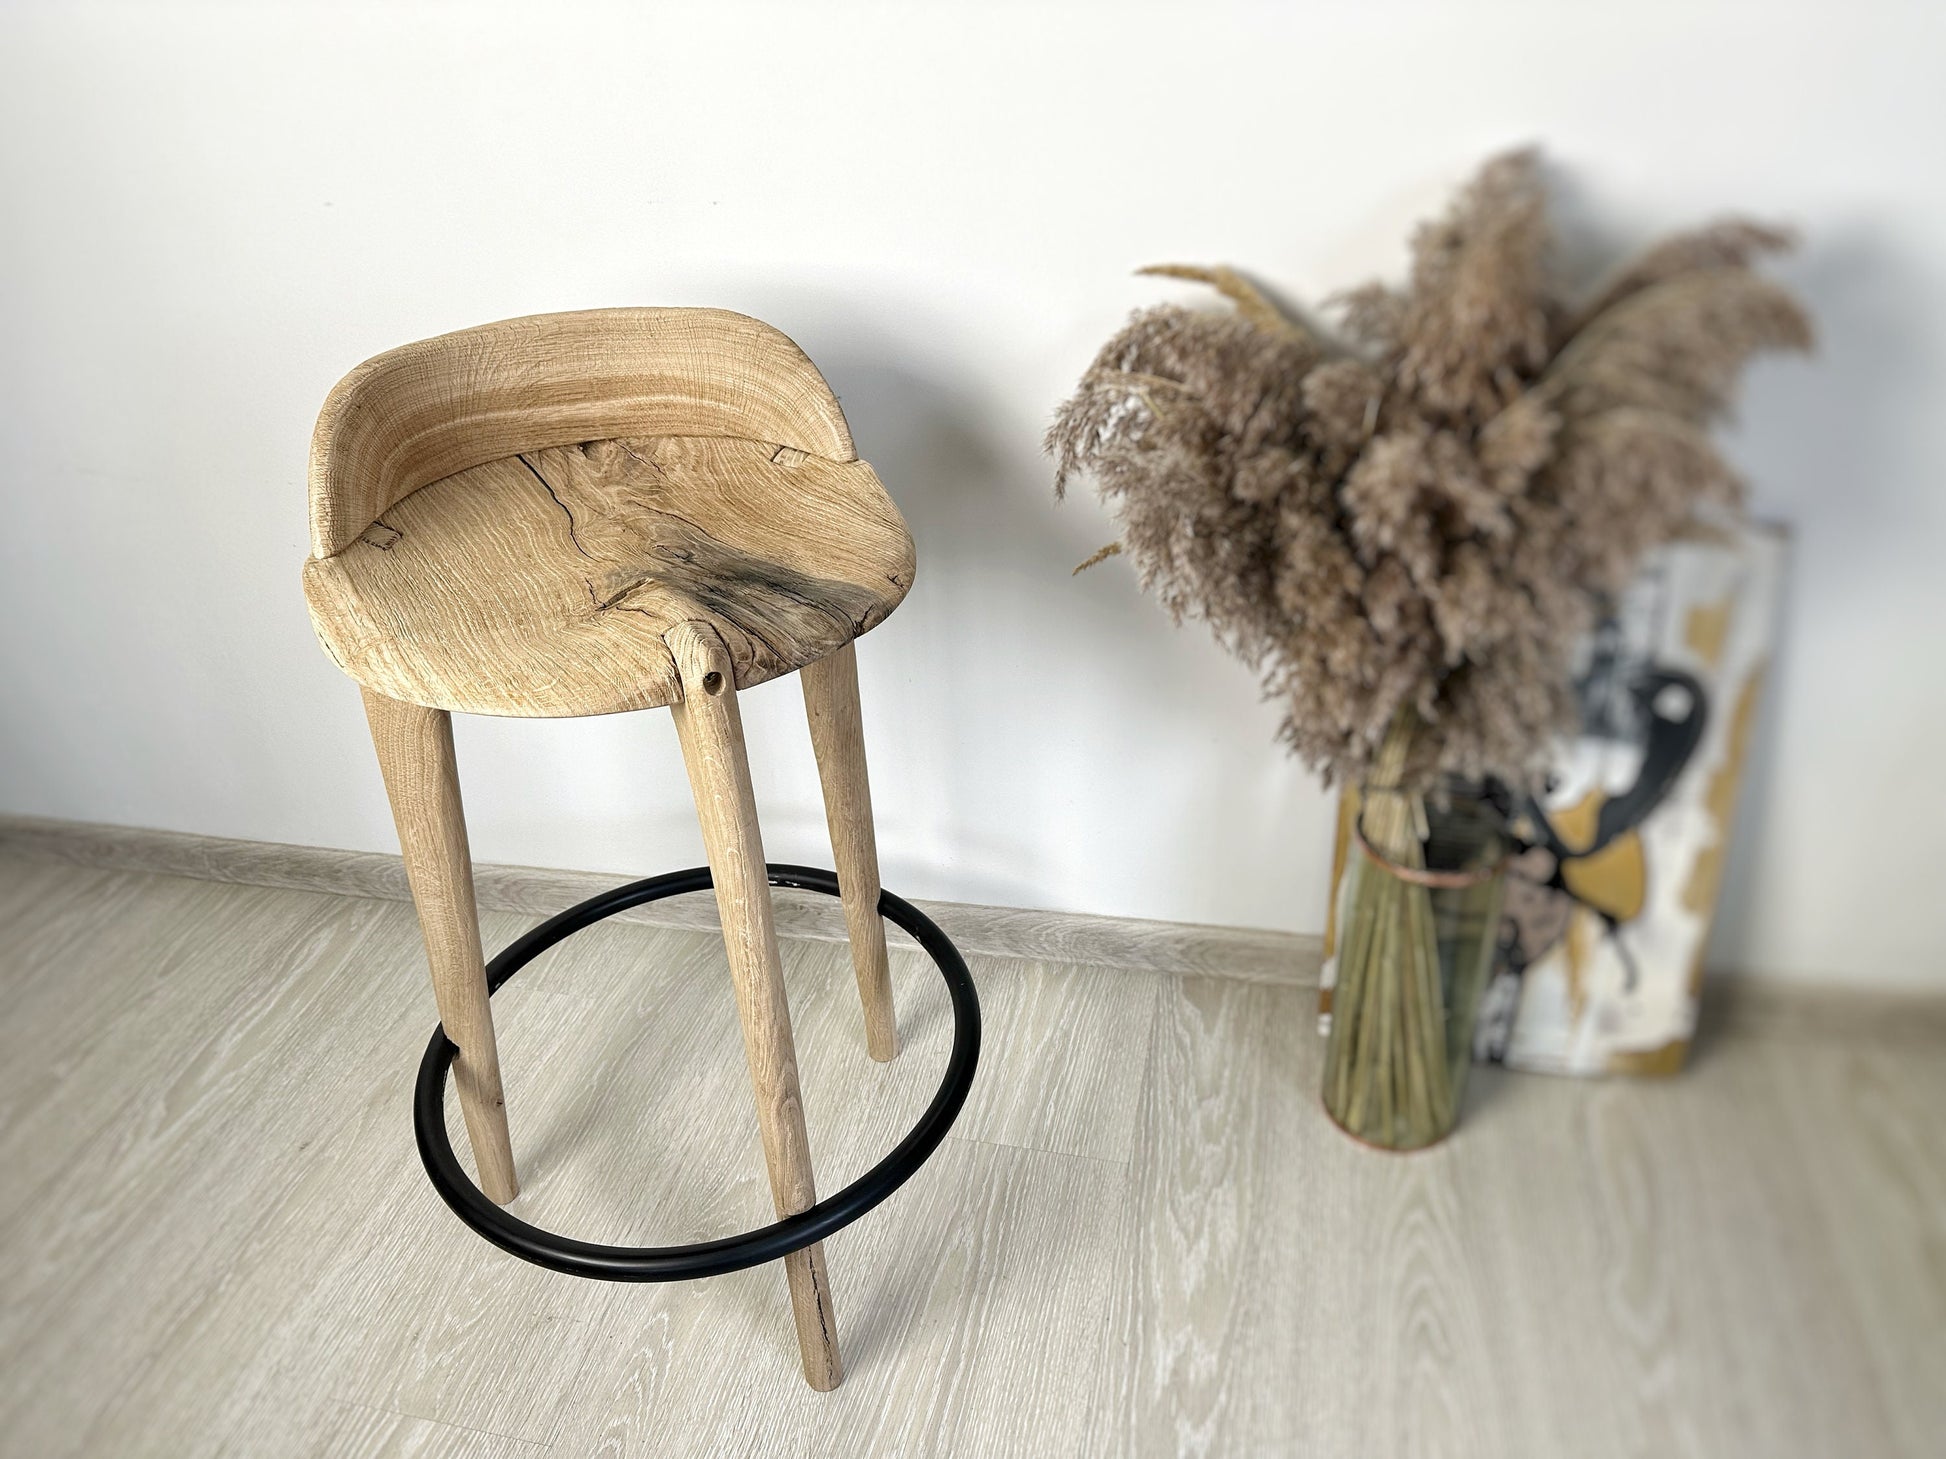 Stool, Bar wooden stool, Carved seat, Height 45 / 65 cm Three legged, Farmhouse oak Chair, Natural Stool, Solid wood, Wooden Stool, Handmade